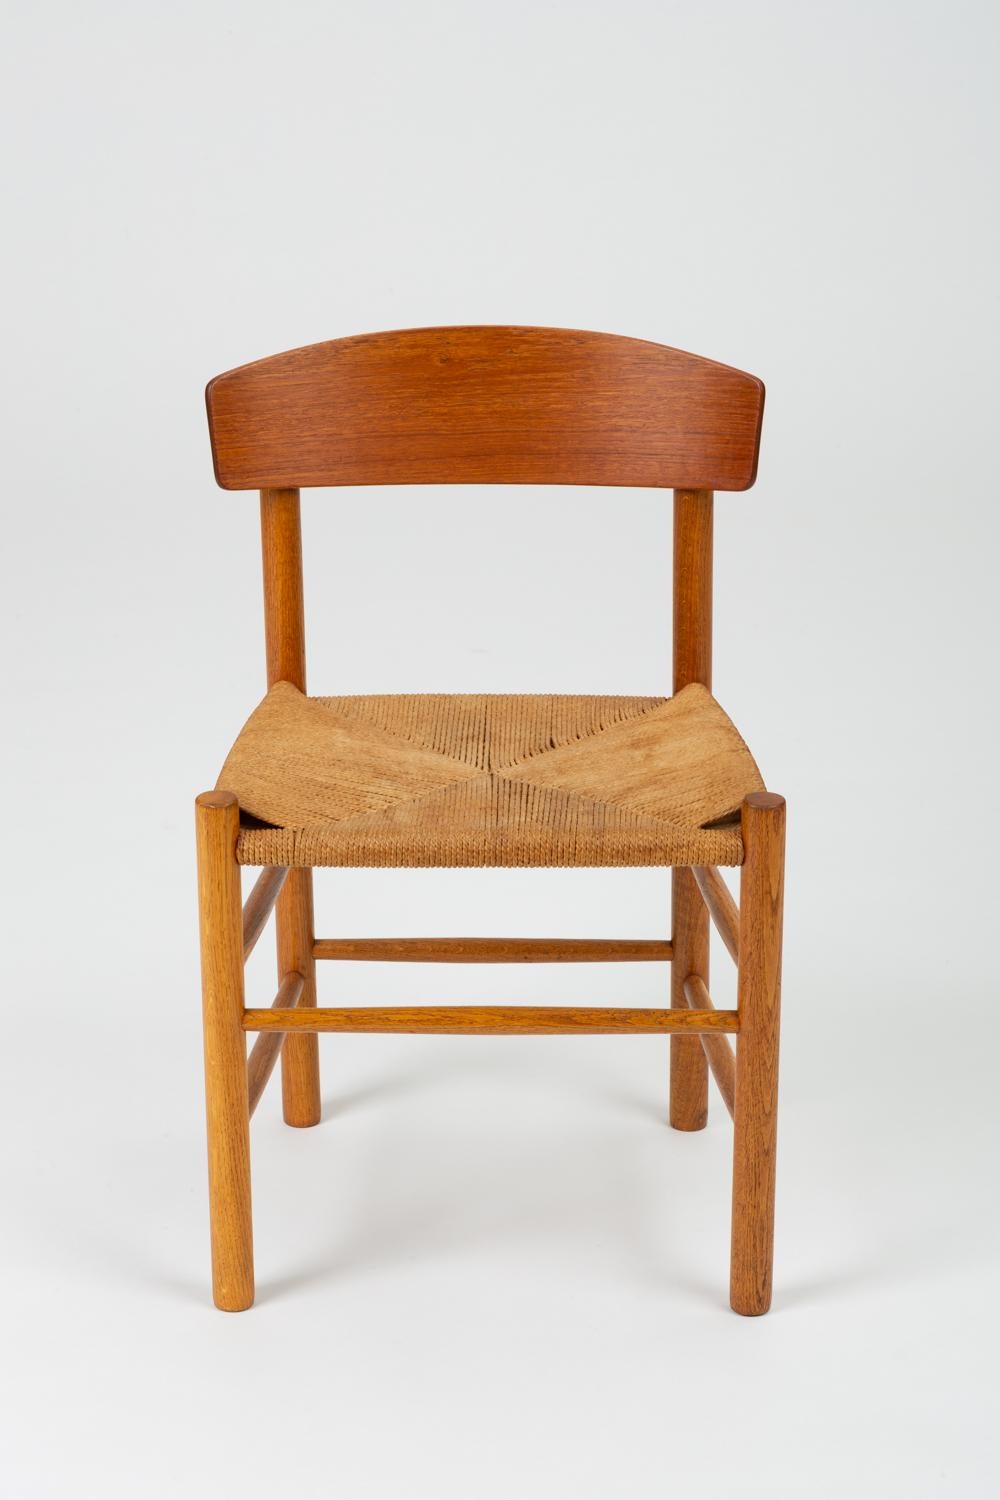 A single dining or accent chair by Børge Mogensen for FDB Møbler beginning in 1947. The J39 or “People’s Chair,” has a frame of oak dowels, with a wide, curved backrest and a woven seat in Danish paper cord. Contrasting wooden plugs cover the